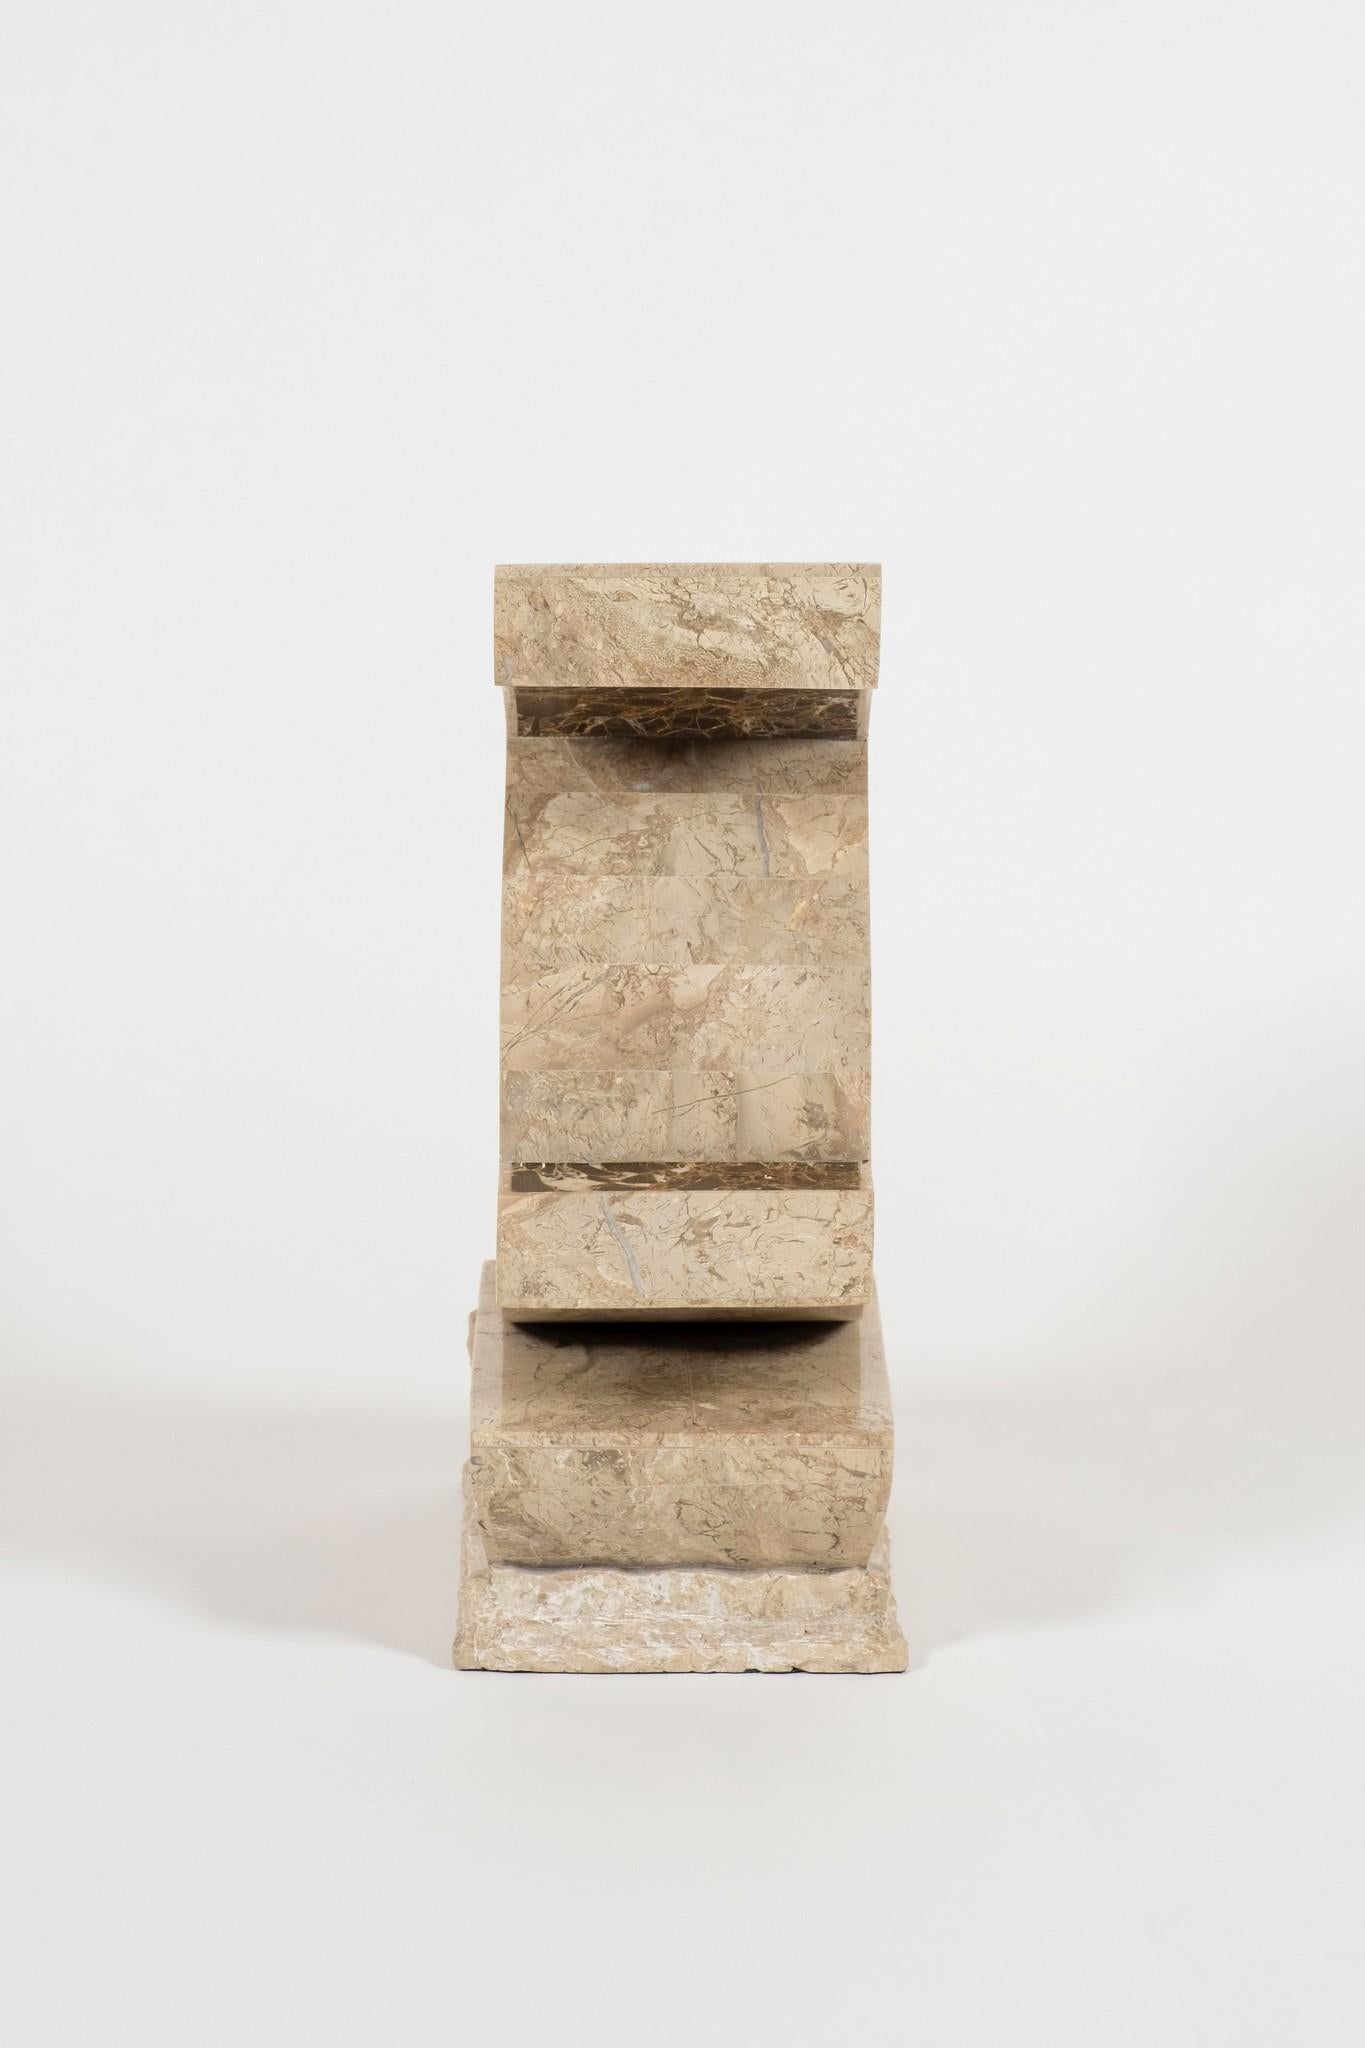 An abstract tessellated two-tone brown marble and travertine sculpture in a deconstructed manner.